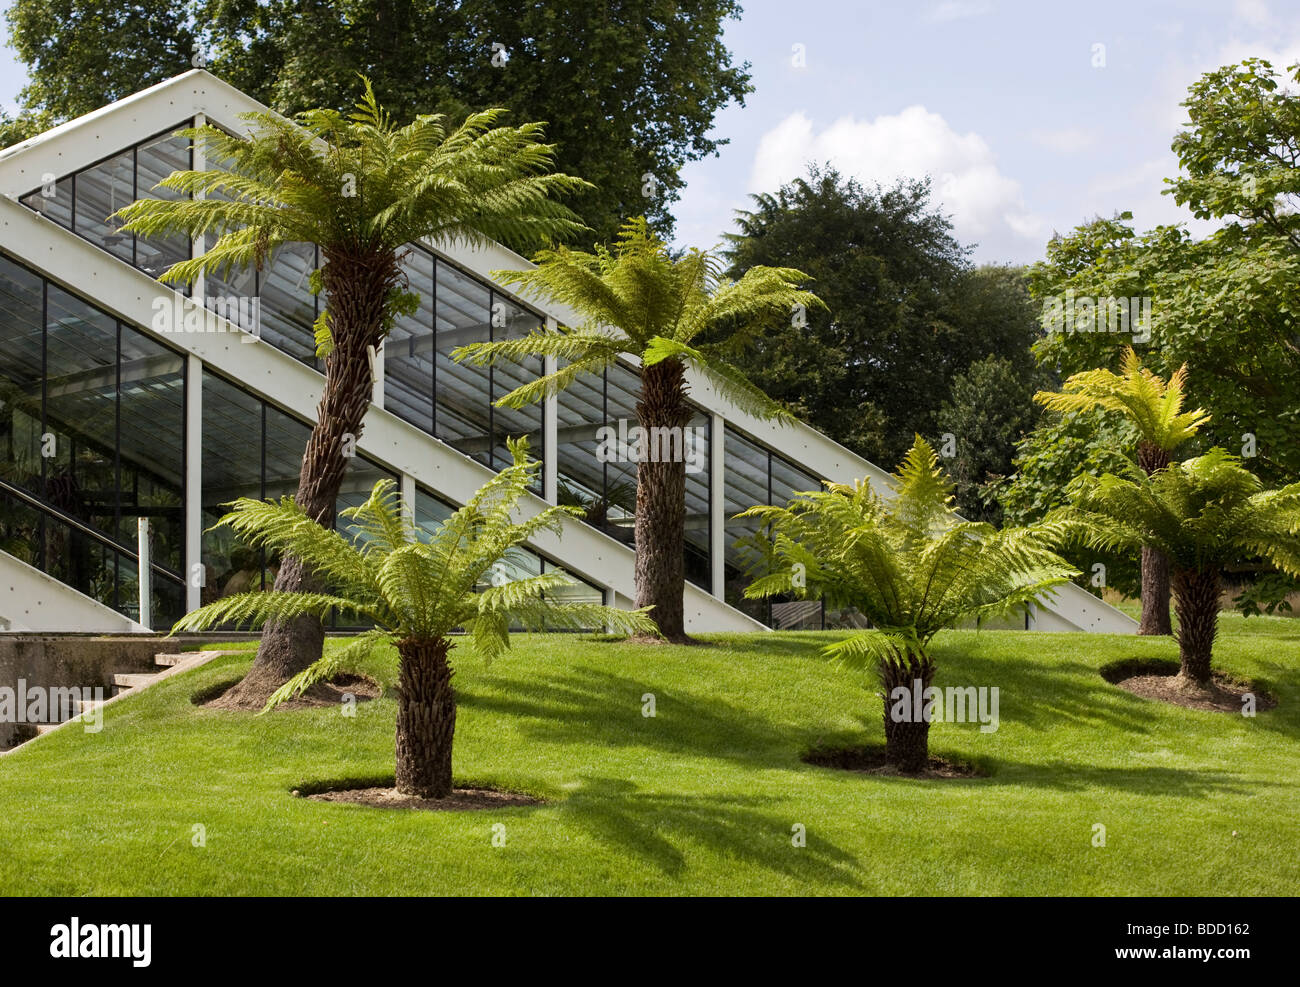 Princess of Wales conservatory Kew Gardens Londres Banque D'Images